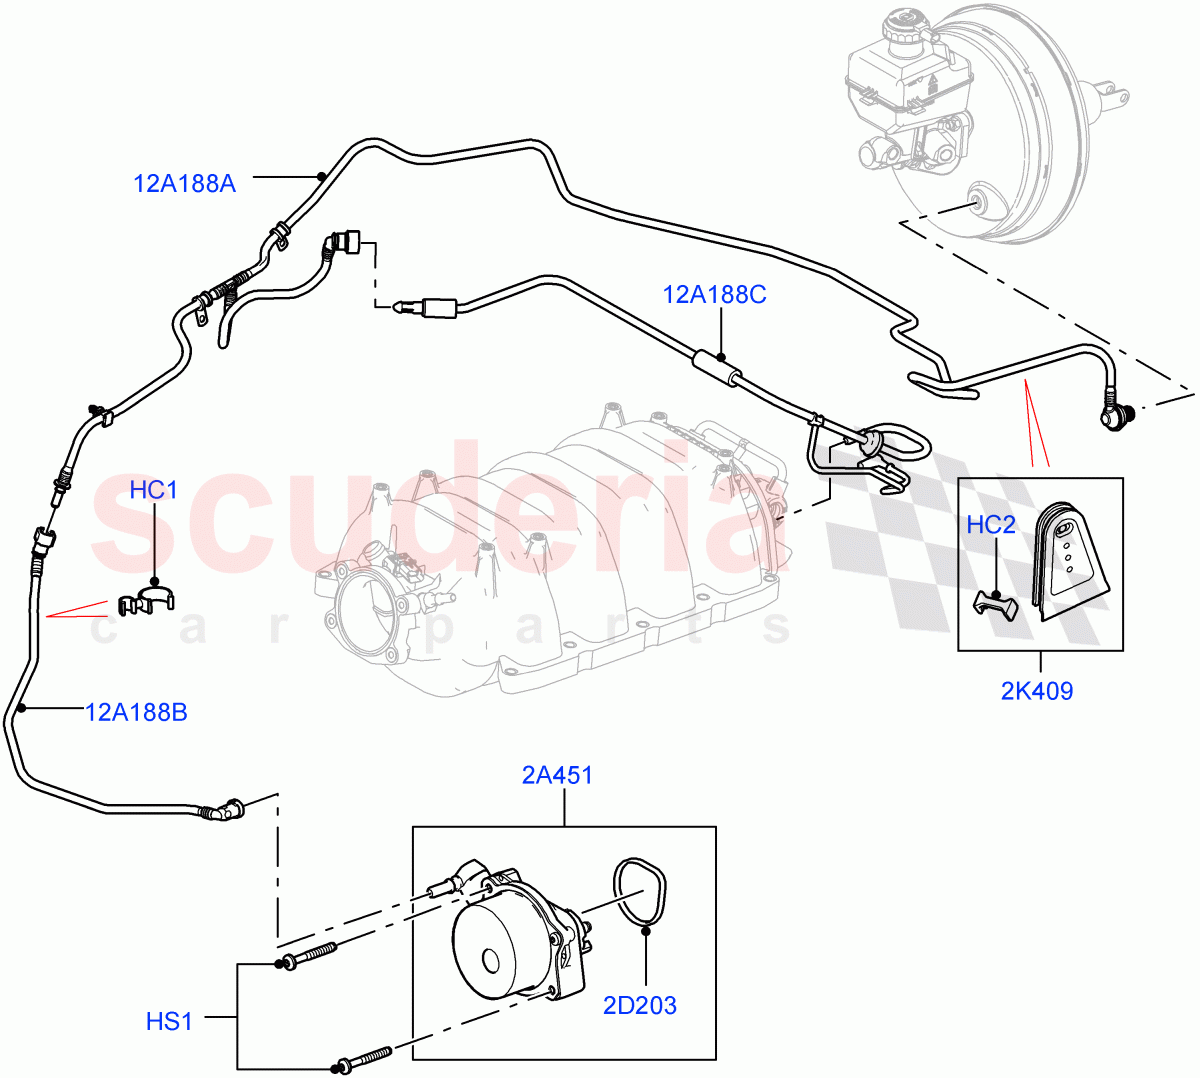 Vacuum Control And Air Injection(5.0L OHC SGDI NA V8 Petrol - AJ133)((V)FROMAA000001) of Land Rover Land Rover Discovery 4 (2010-2016) [5.0 OHC SGDI NA V8 Petrol]